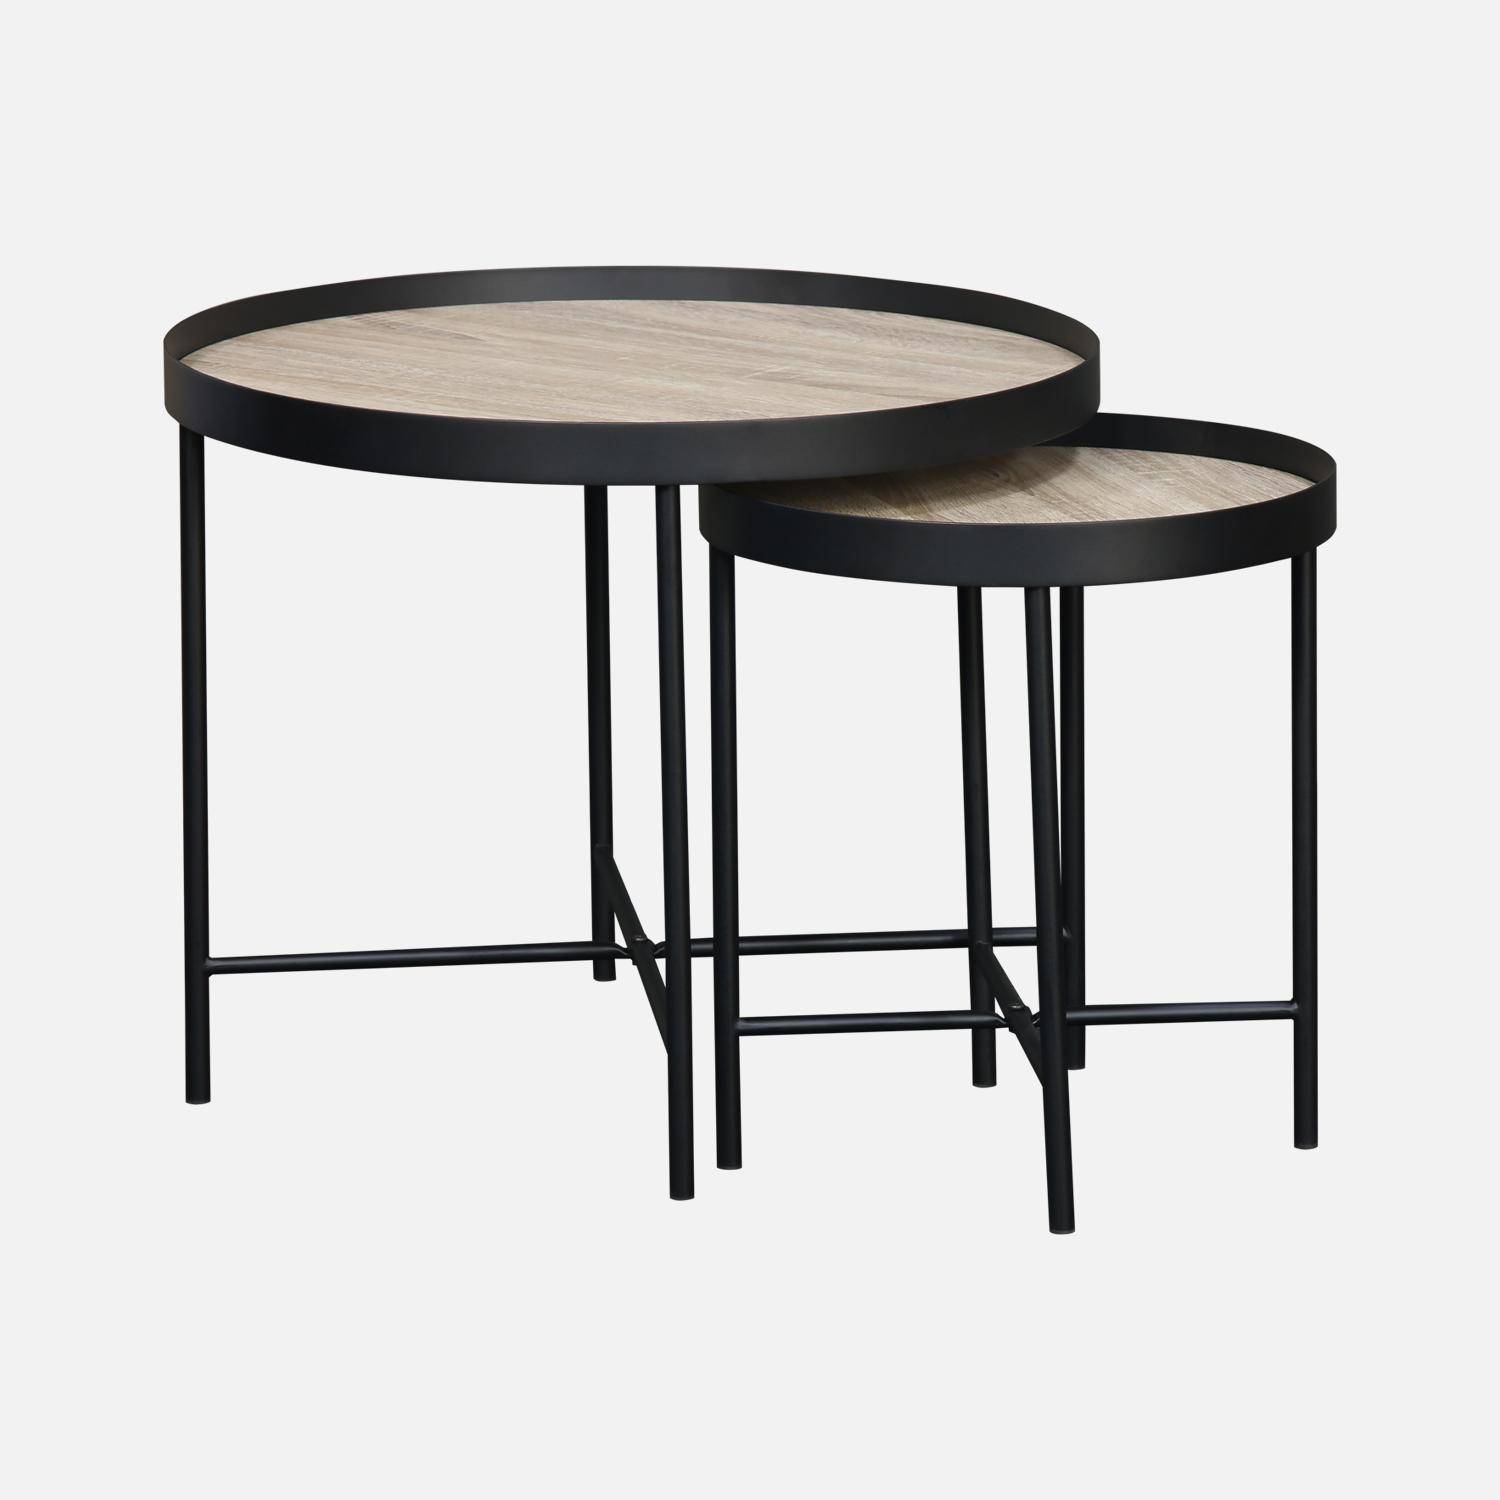 Set of 2 practical round nesting tables in oak-effect MDF with black legs Photo3